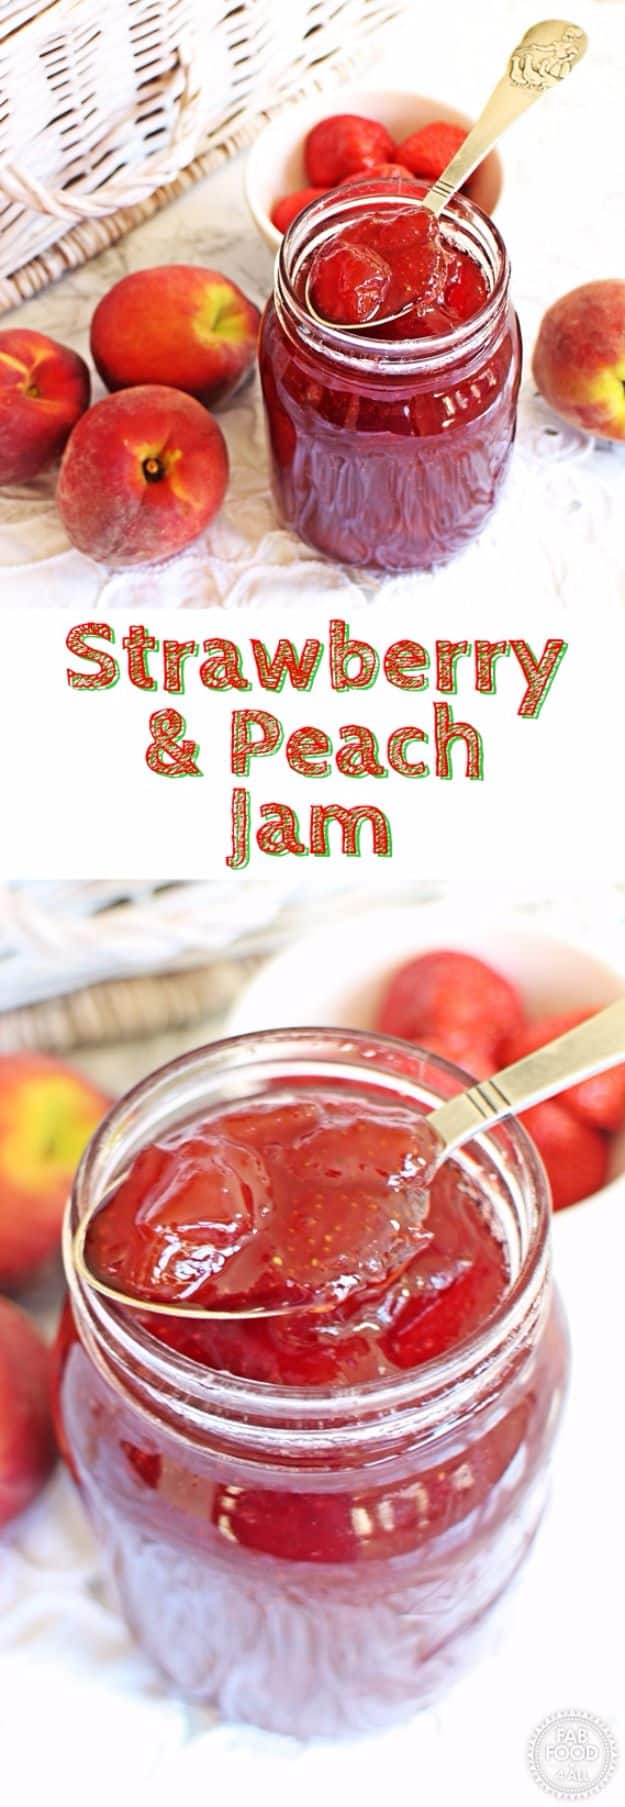 Best Jam and Jelly Recipes - Strawberry & Peach Jam - Homemade Recipe Ideas For Canning - Easy and Unique Jams and Jellies Made With Strawberry, Raspberry, Blackberry, Peach and Fruit - Healthy, Sugar Free, No Pectin, Small Batch, Savory and Freezer Recipes #recipes #jelly